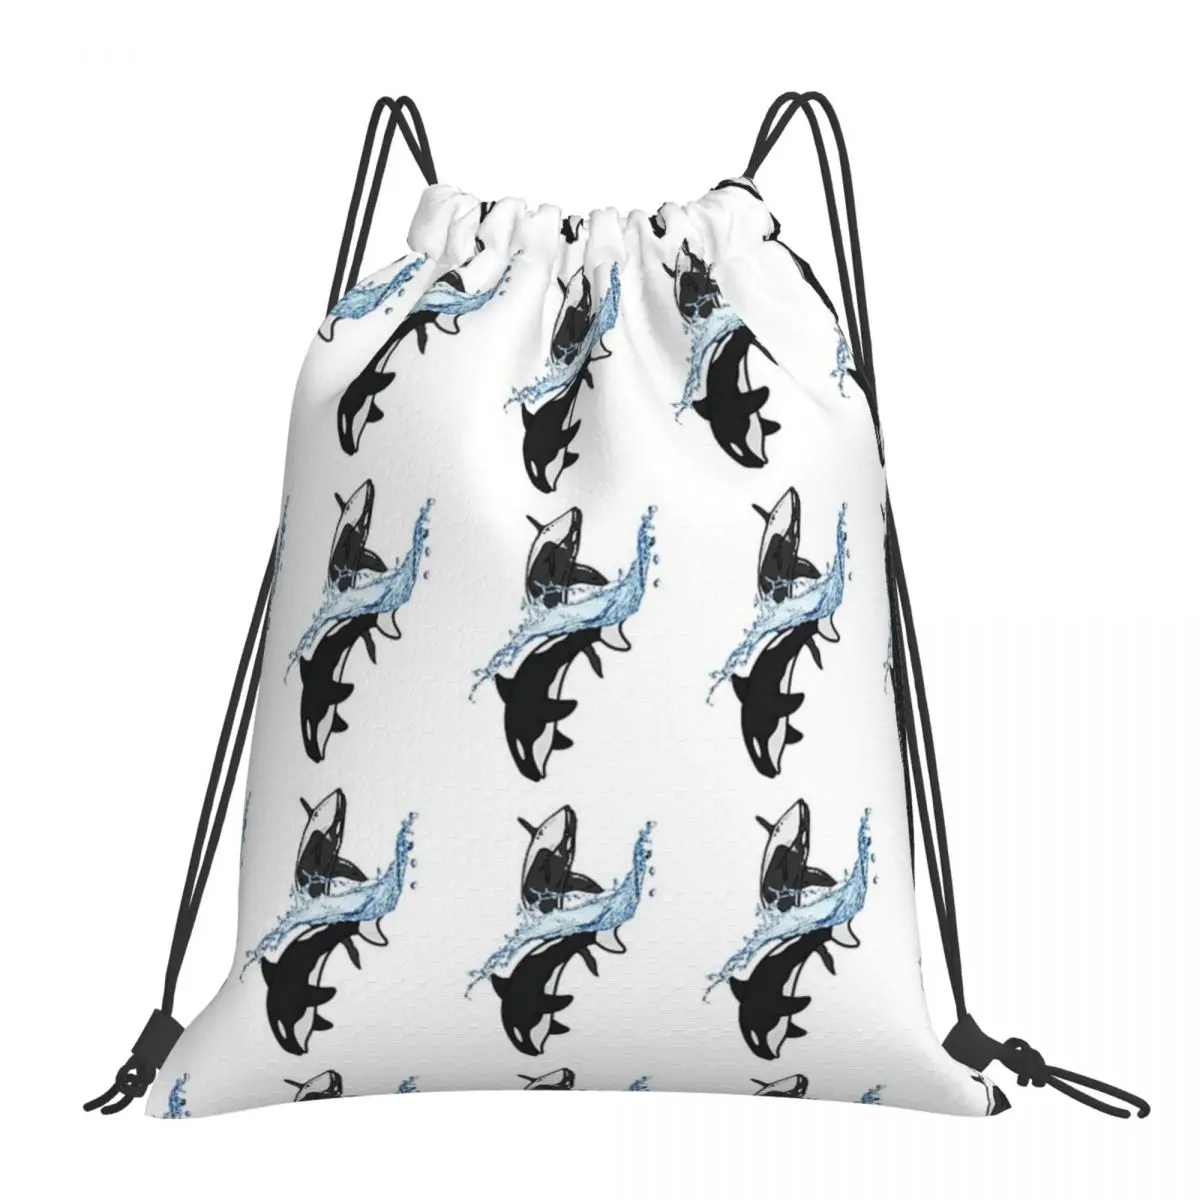 

Orca Whale Orcan Sea Dolphin Whales Orcas Killer Whales Orca Whale Backpacks Portable Drawstring Bags Drawstring Bundle Pocket